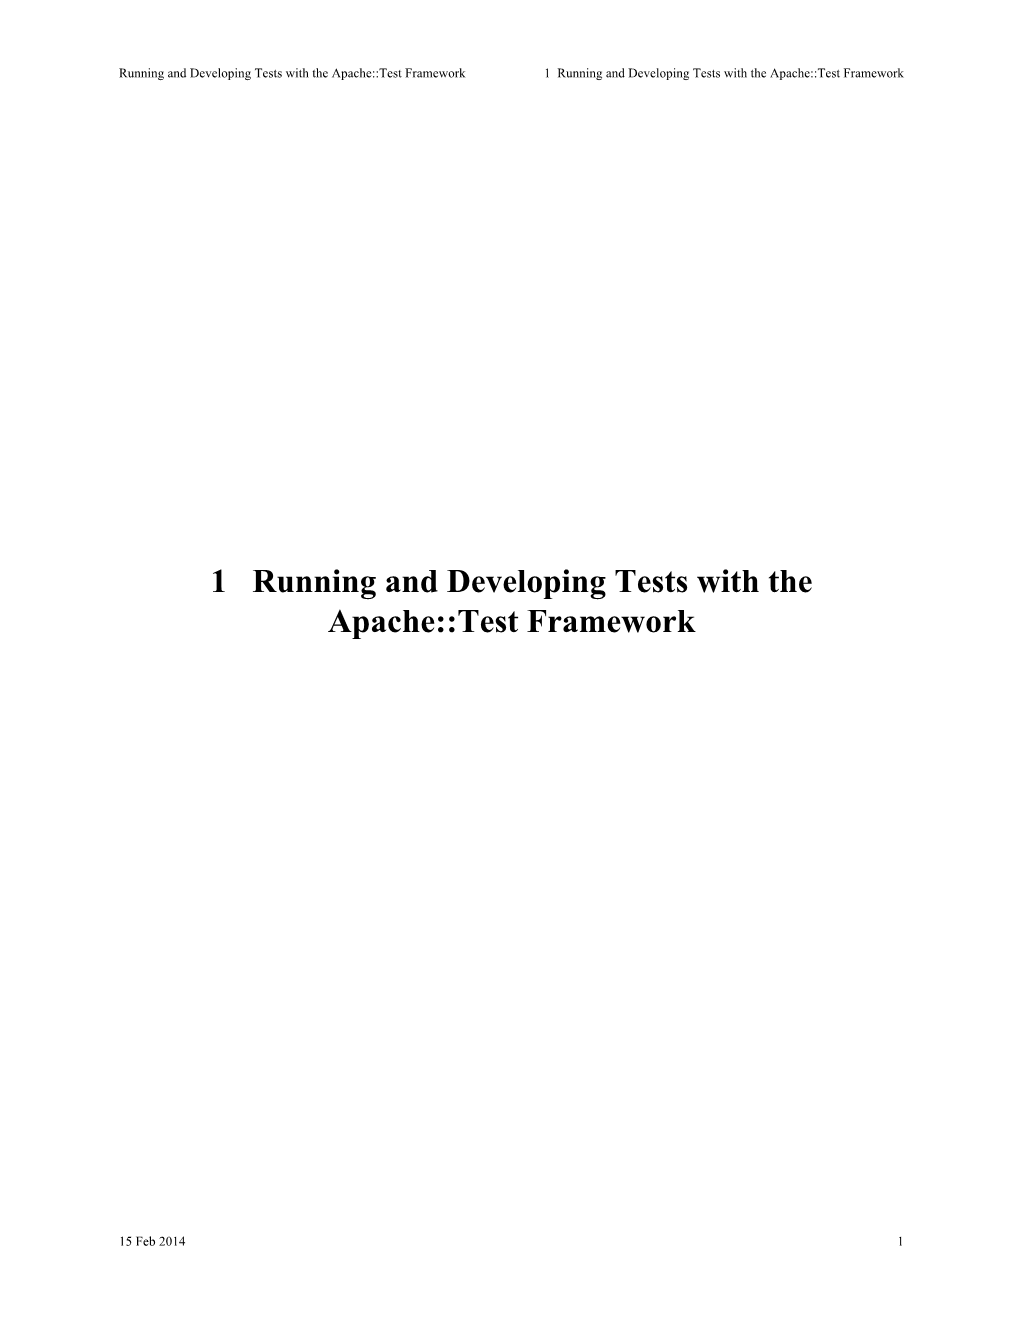 Test Framework 1 Running and Developing Tests with the Apache::Test Framework